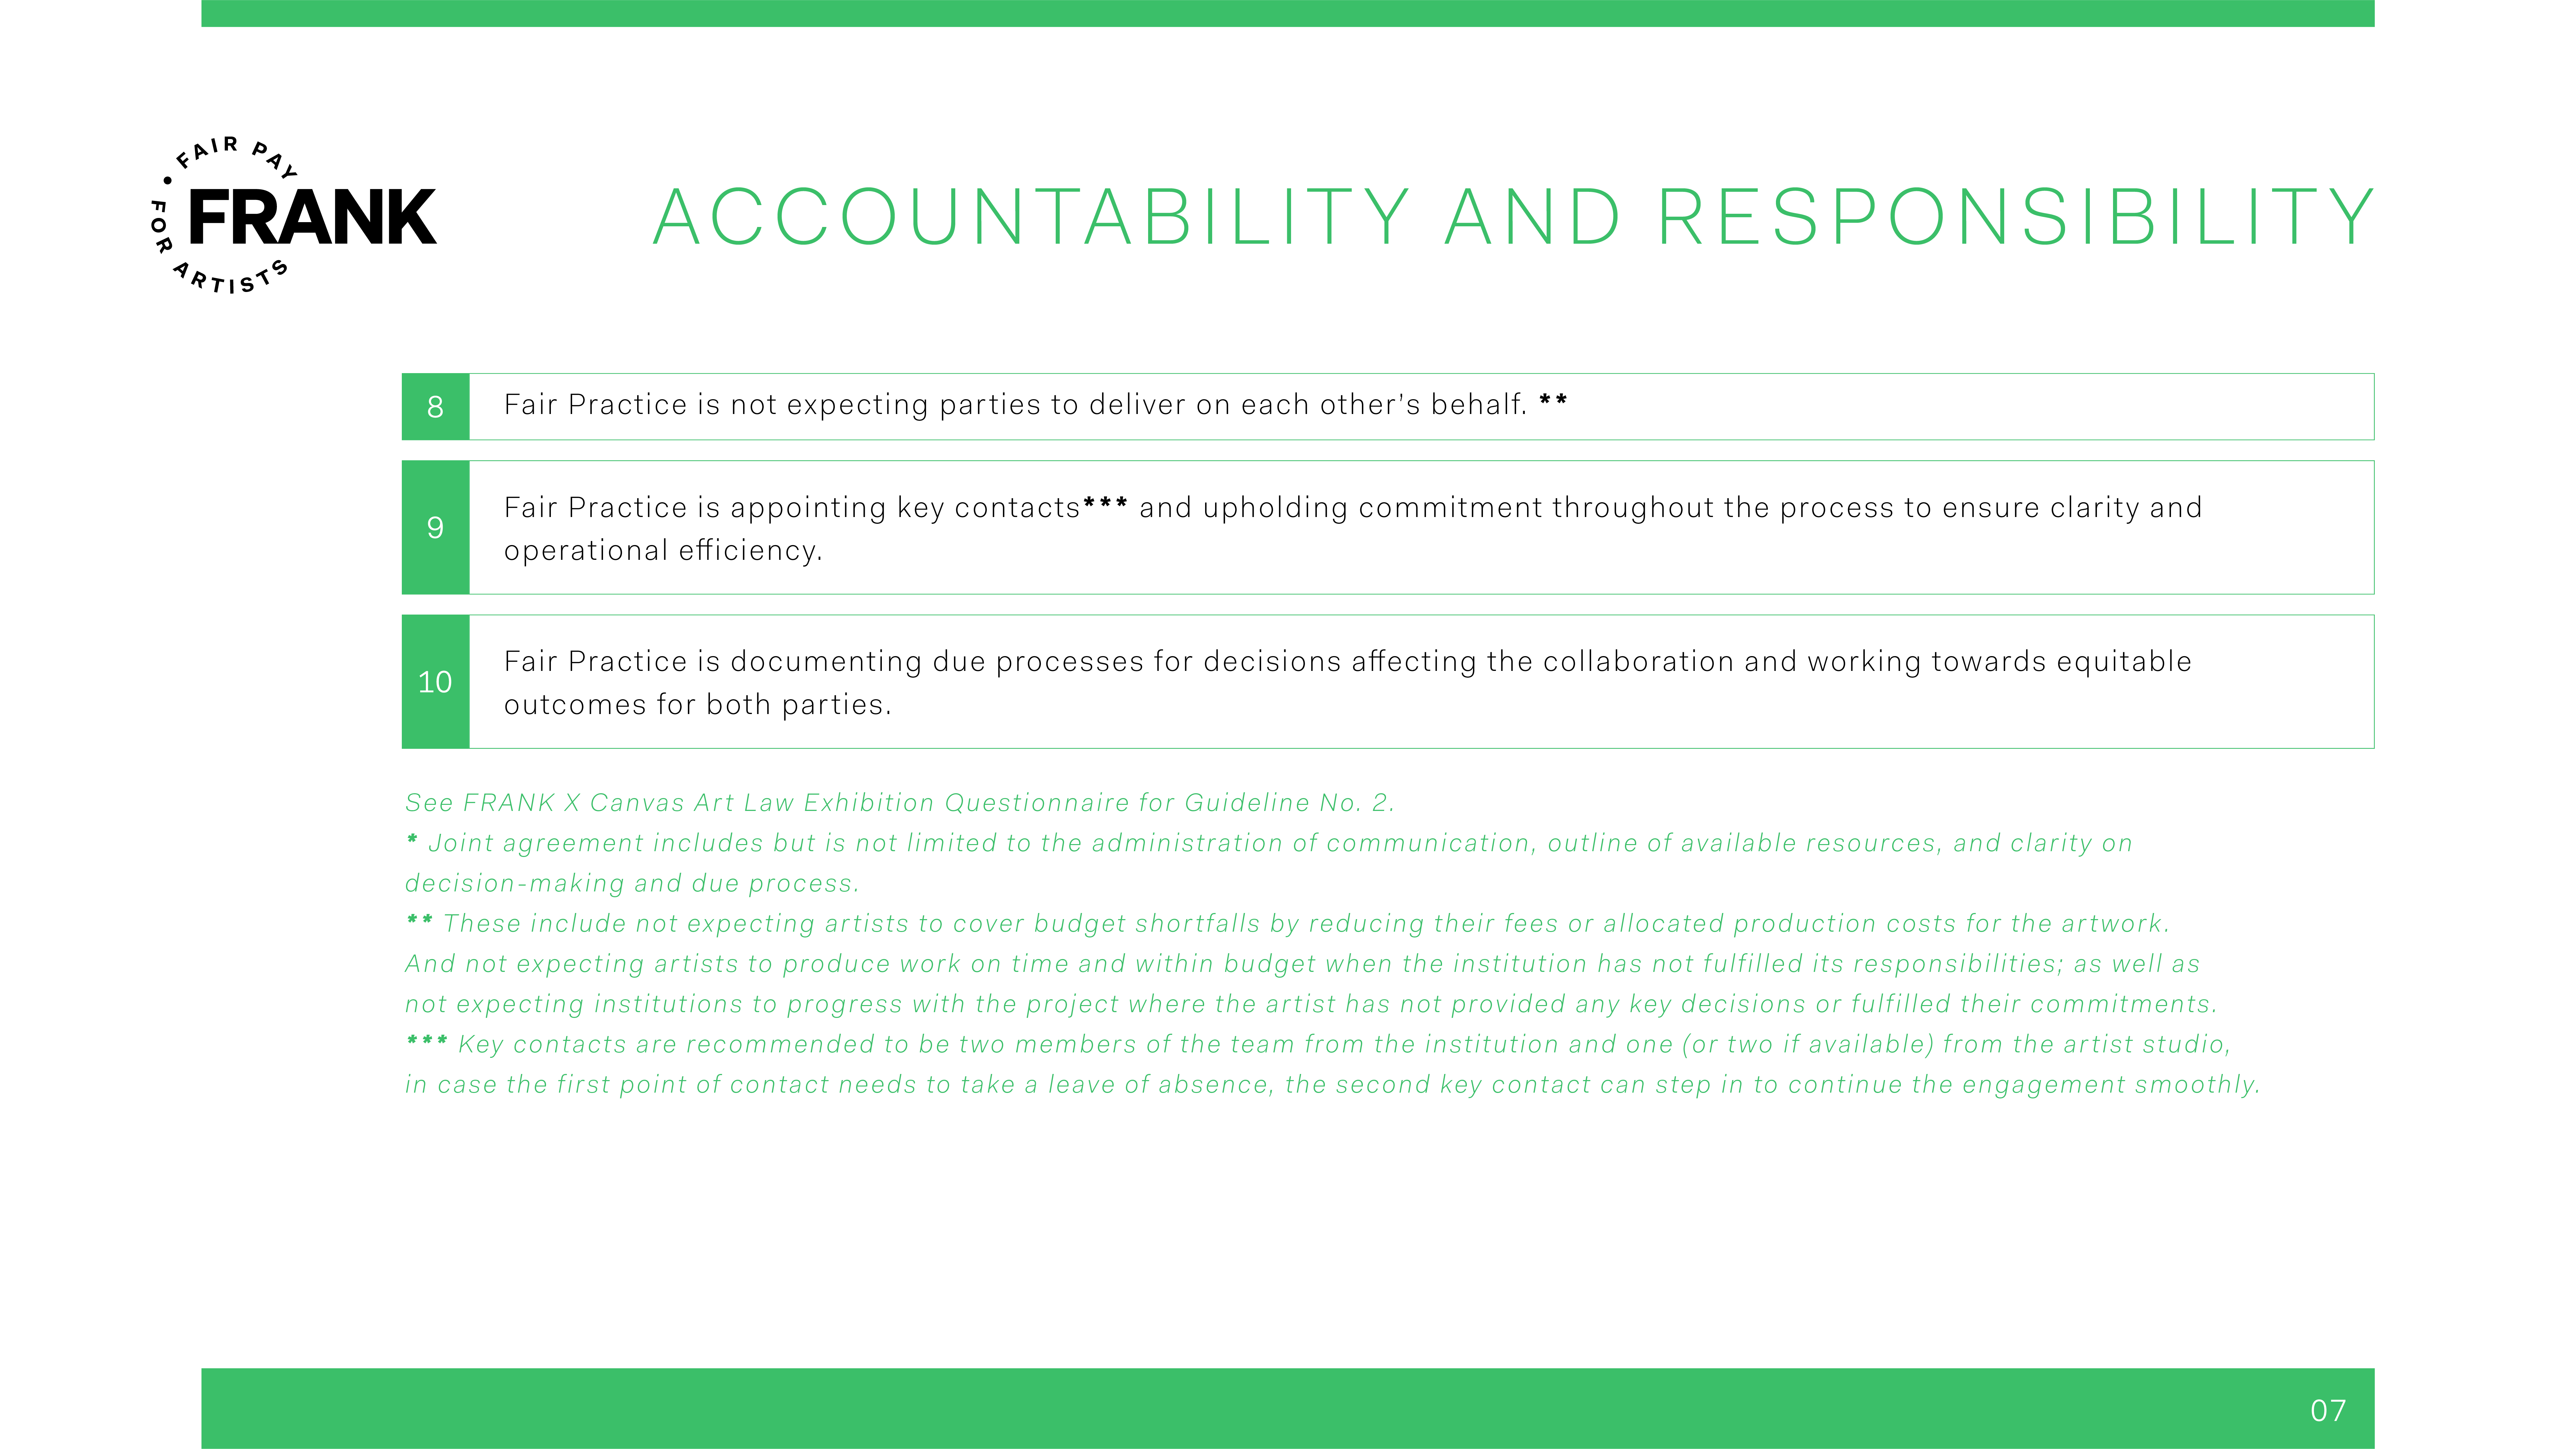 Continuation of Accountability and Responsibility 8) Fair Practice is not expecting parties to deliver on each other’s behalf. ** 9) Fair Practice is appointing key contacts*** and upholding commitment throughout the process to ensure clarity and operational efficiency. 10) Fair Practice is documenting due processes for decisions affecting the collaboration and working towards equitable outcomes for both parties. Note: See FRANK X Canvas Art Law Exhibition Questionnaire for Guideline No. 2. * Joint agreement includes but is not limited to the administration of communication, outline of available resources, and clarity on decision-making and due process. ** These include not expecting artists to cover budget shortfalls by reducing their fees or allocated production costs for the artwork. And not expecting artists to produce work on time and within budget when the institution has not fulfilled its responsibilities; as well as not expecting institutions to progress with the project where the artist has not provided any key decisions or fulfilled their commitments. *** Key contacts are recommended to be two members of the team from the institution and one (or two if available) from the artist studio, in case the first point of contact needs to take a leave of absence, the second key contact can step in to continue the engagement smoothly.